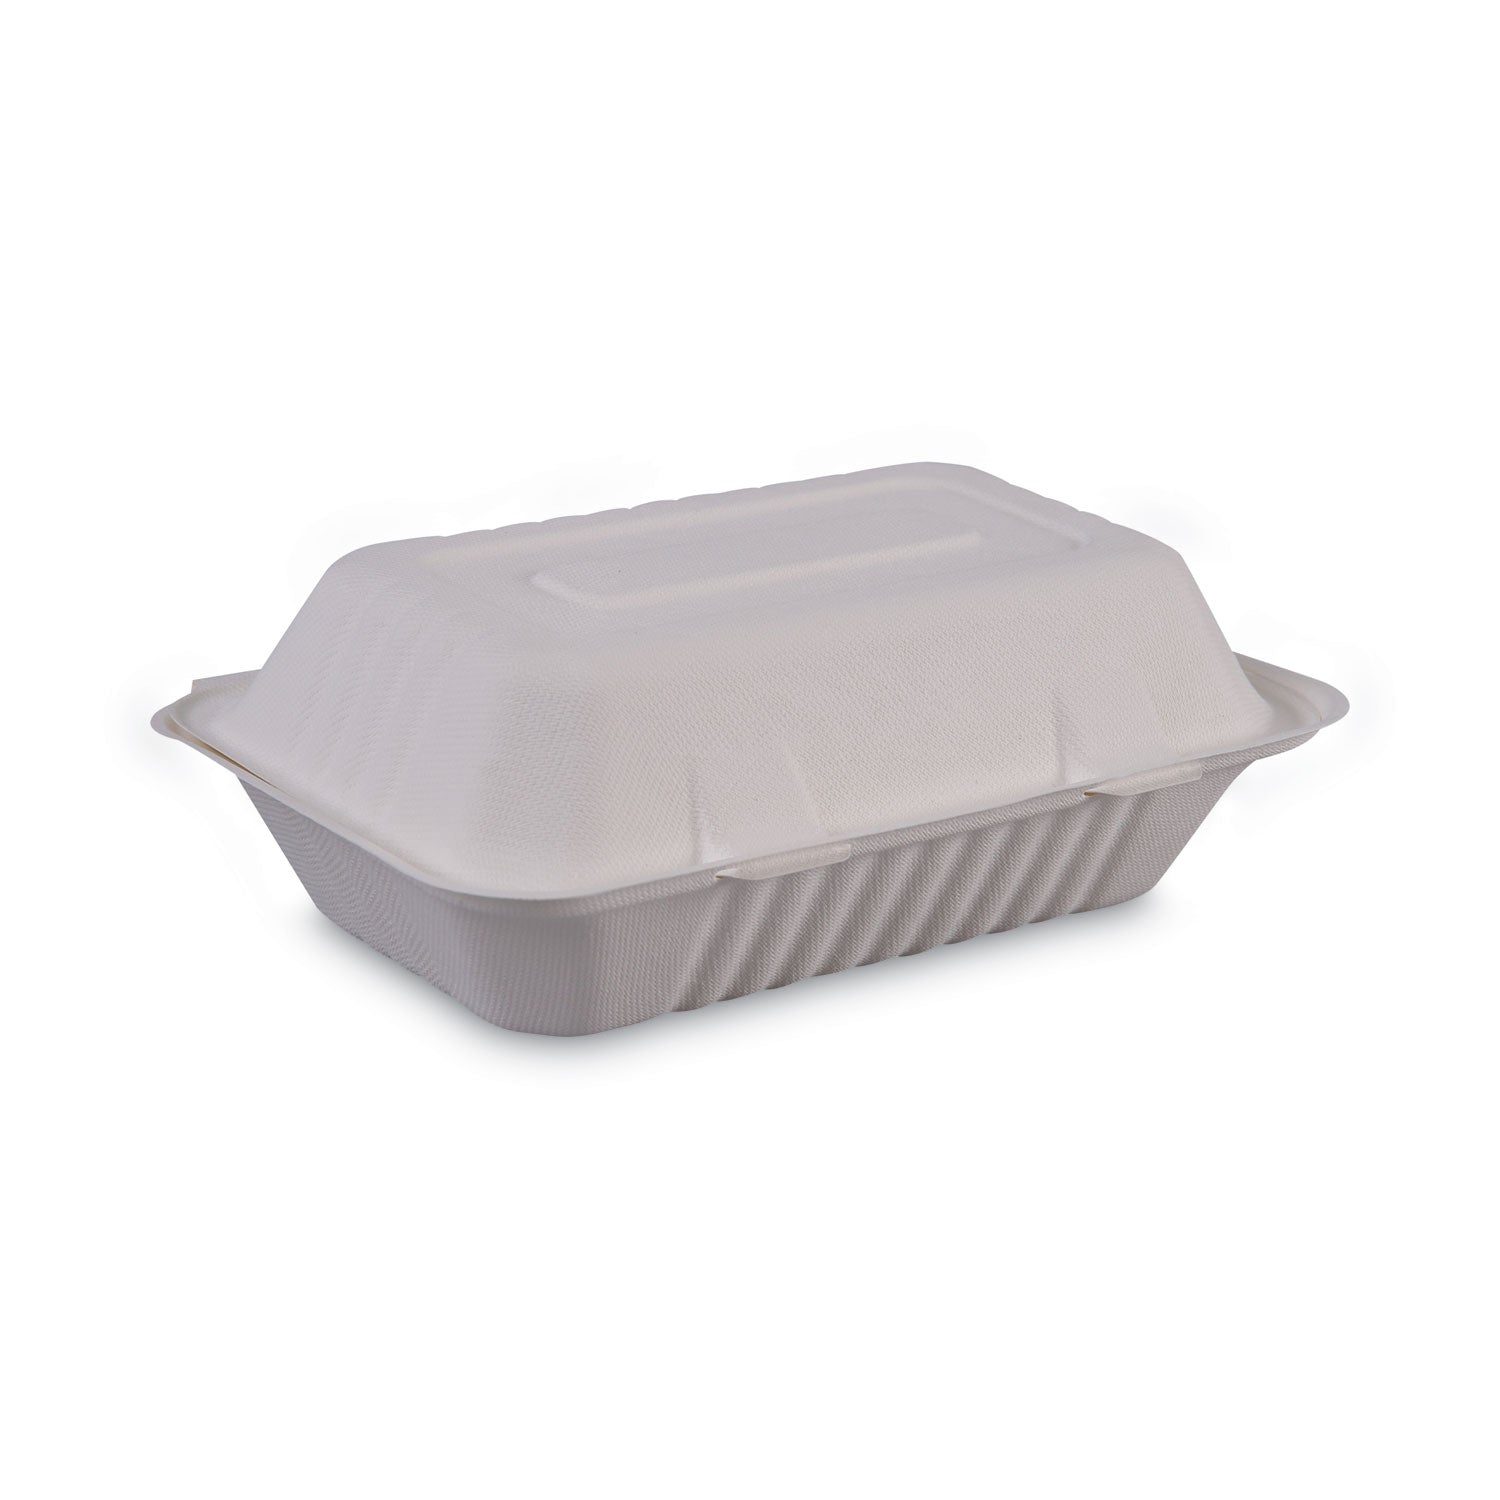 bagasse-food-containers-hinged-lid-1-compartment-9-x-6-x-319-white-sugarcane-125-sleeve-2-sleeves-carton_bwkhingewfhg1c9 - 2